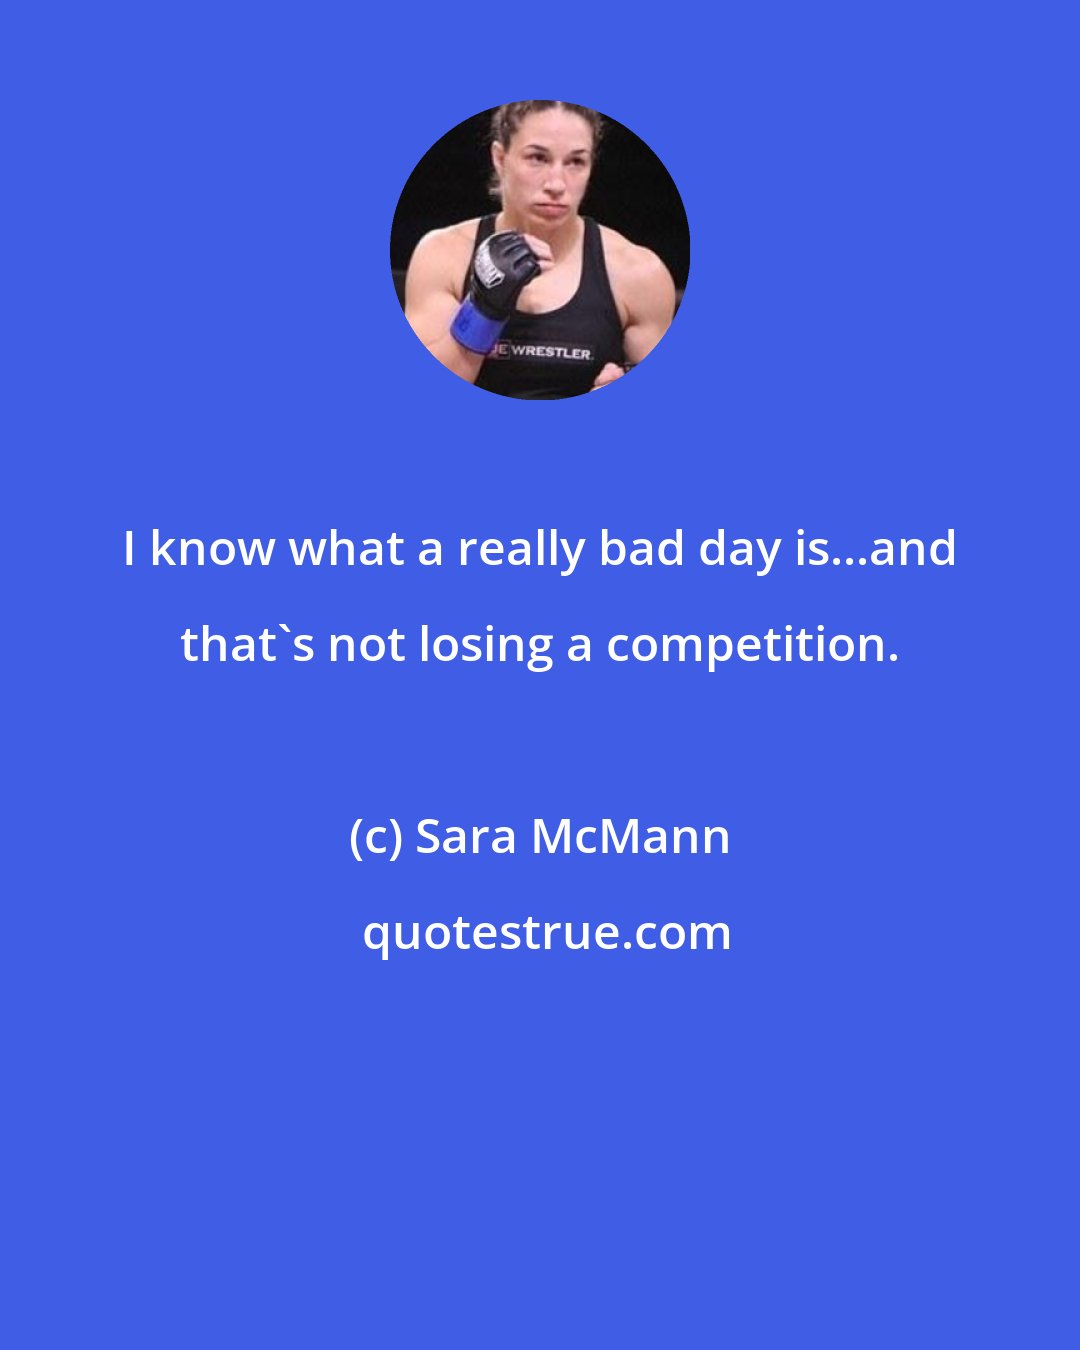 Sara McMann: I know what a really bad day is...and that's not losing a competition.